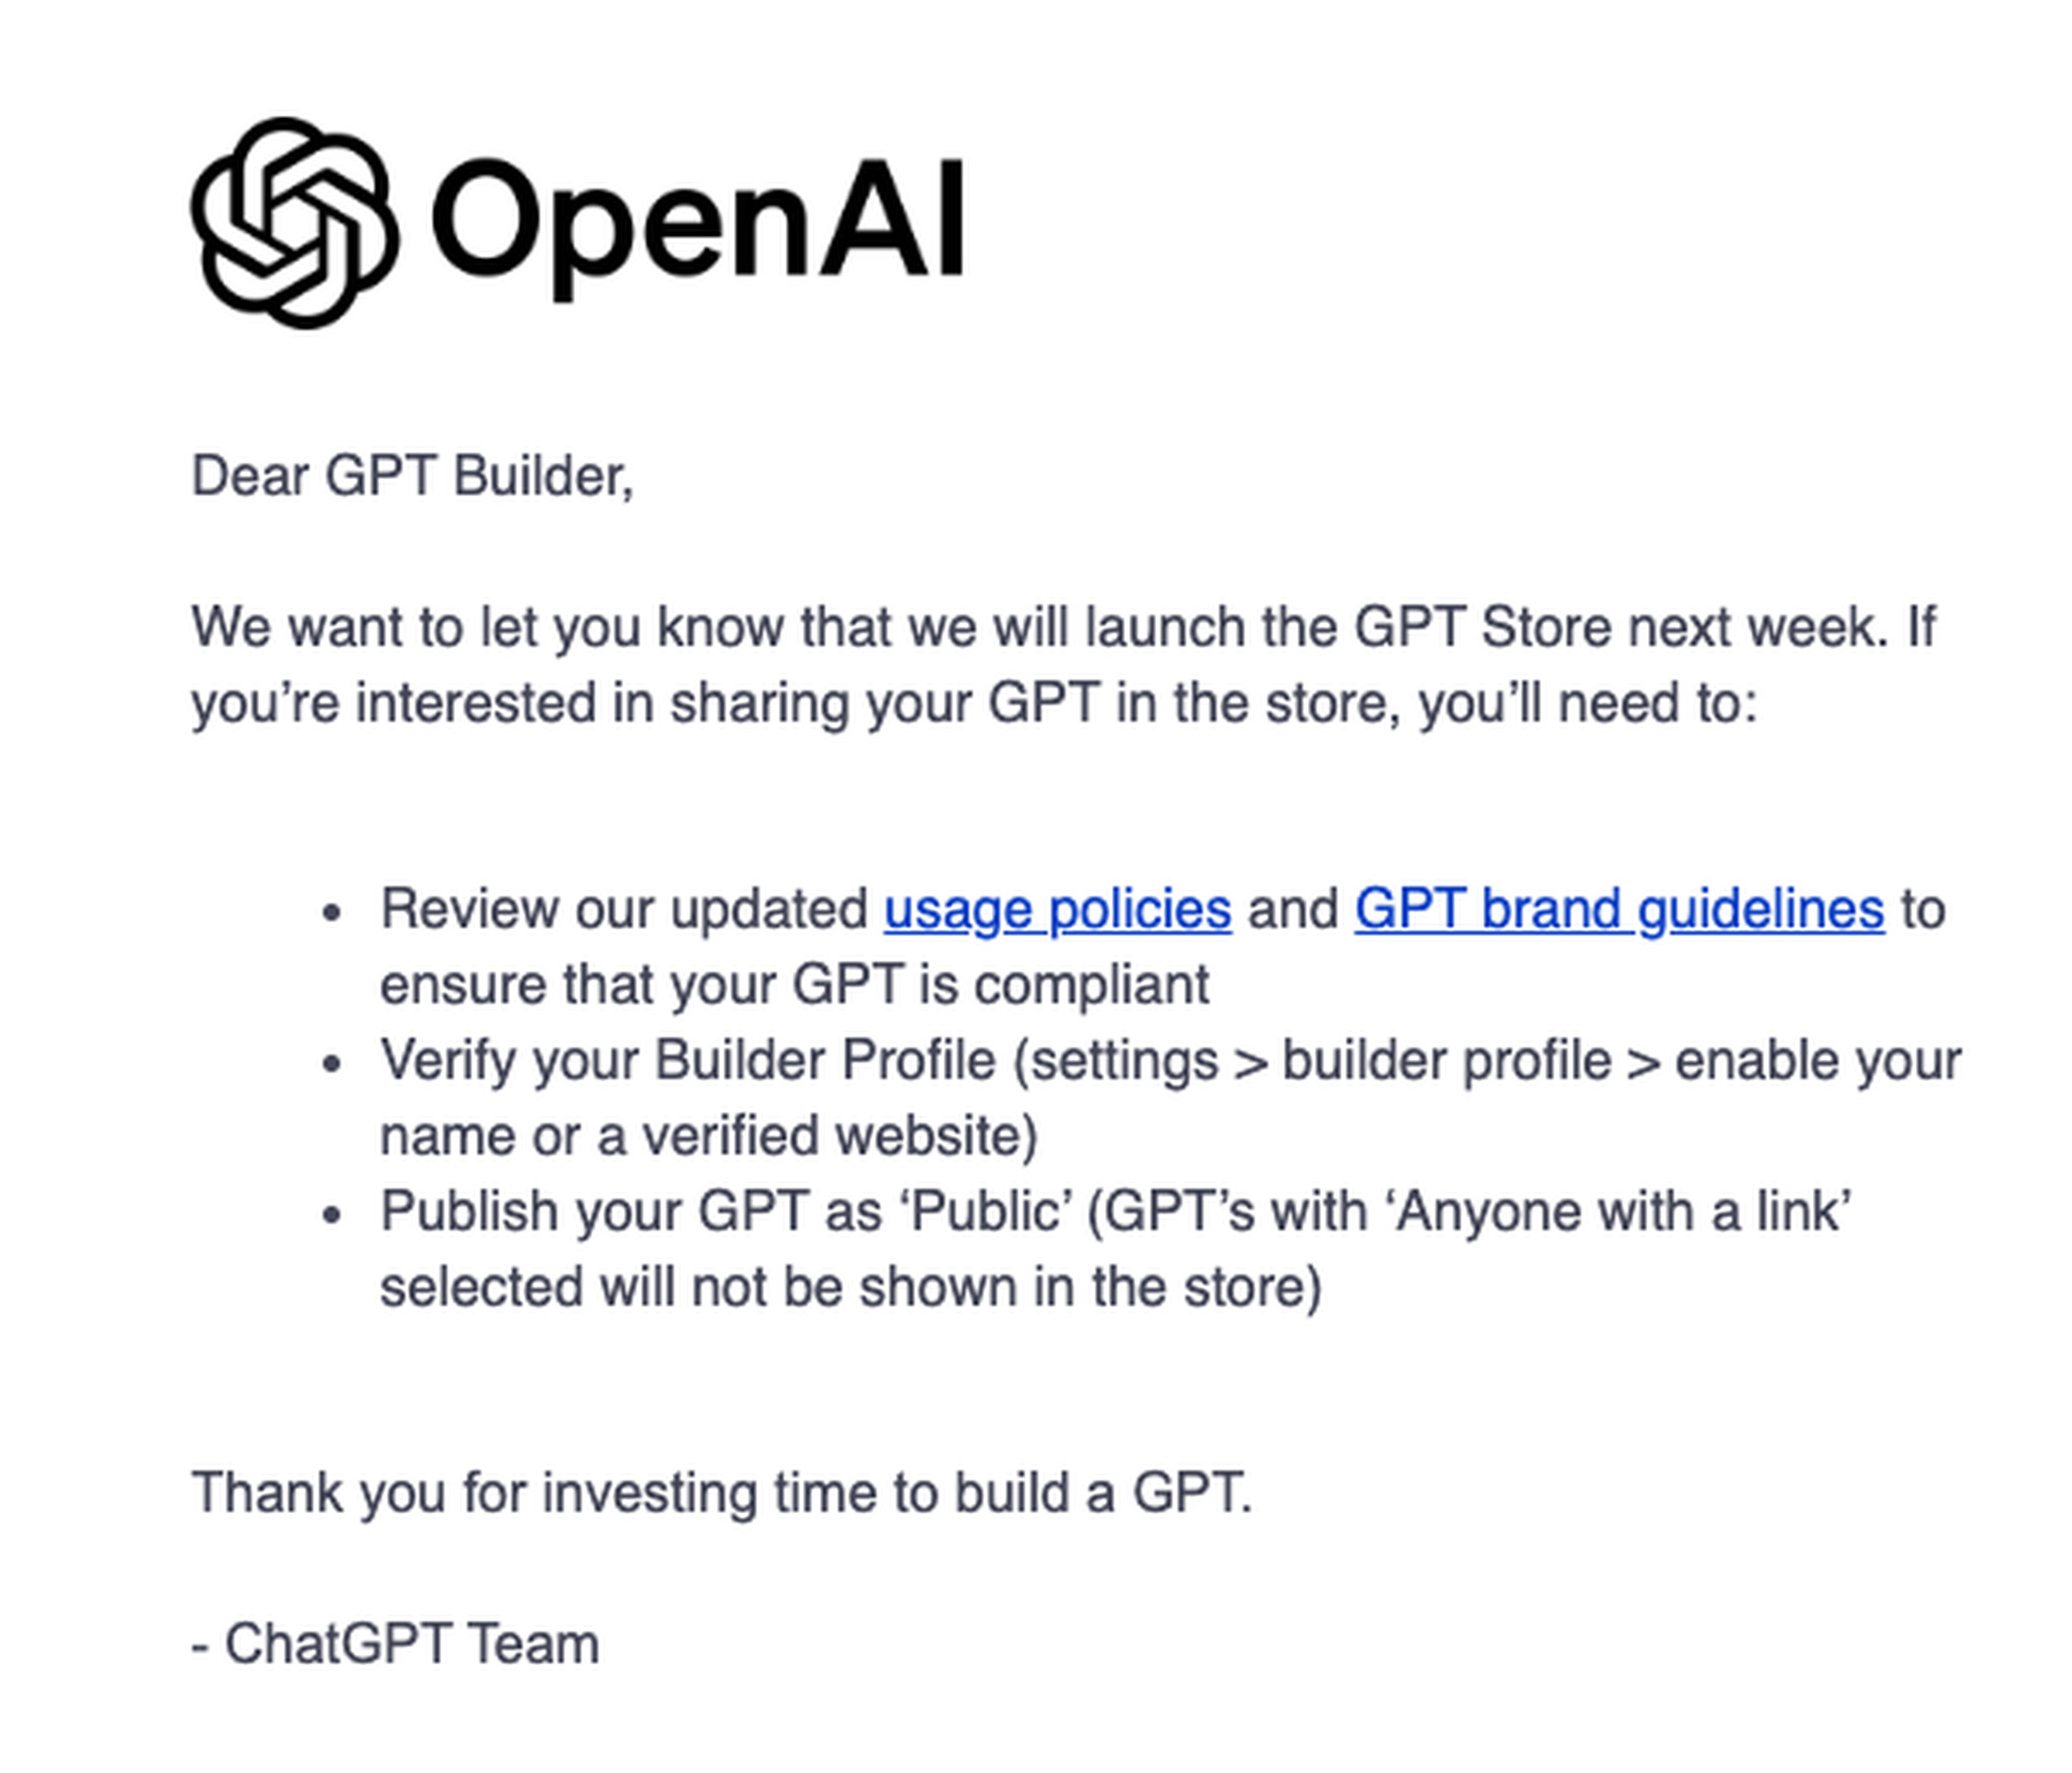 Email from OpenAI on GPT Store